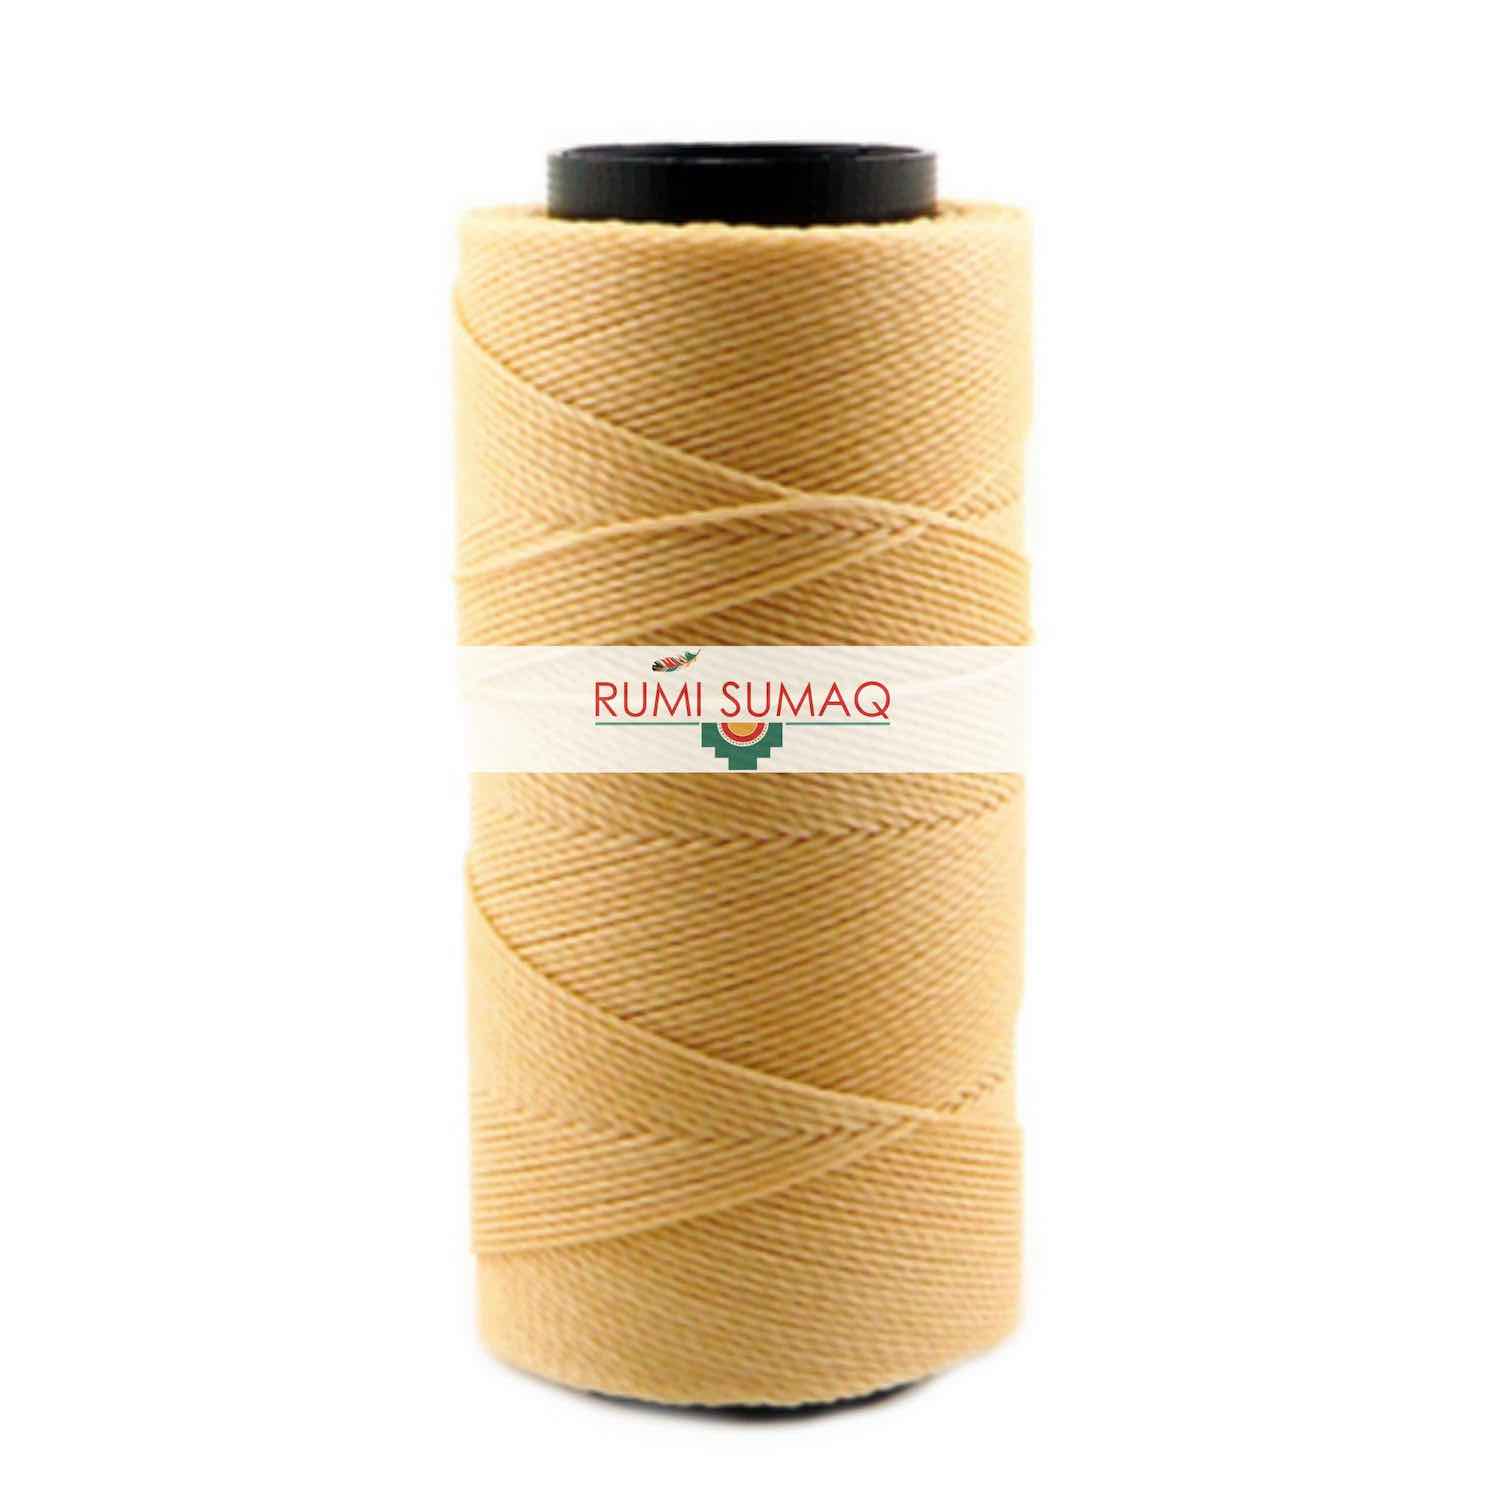 Settanyl 01-118 Golden Wheat Waxed Polyester Cord 1mm Waxed Thread | RUMI SUMAQ Cords for Macrame Jewelry, Basket Weaving, Leather Working, Quilting, and Beading Projects.